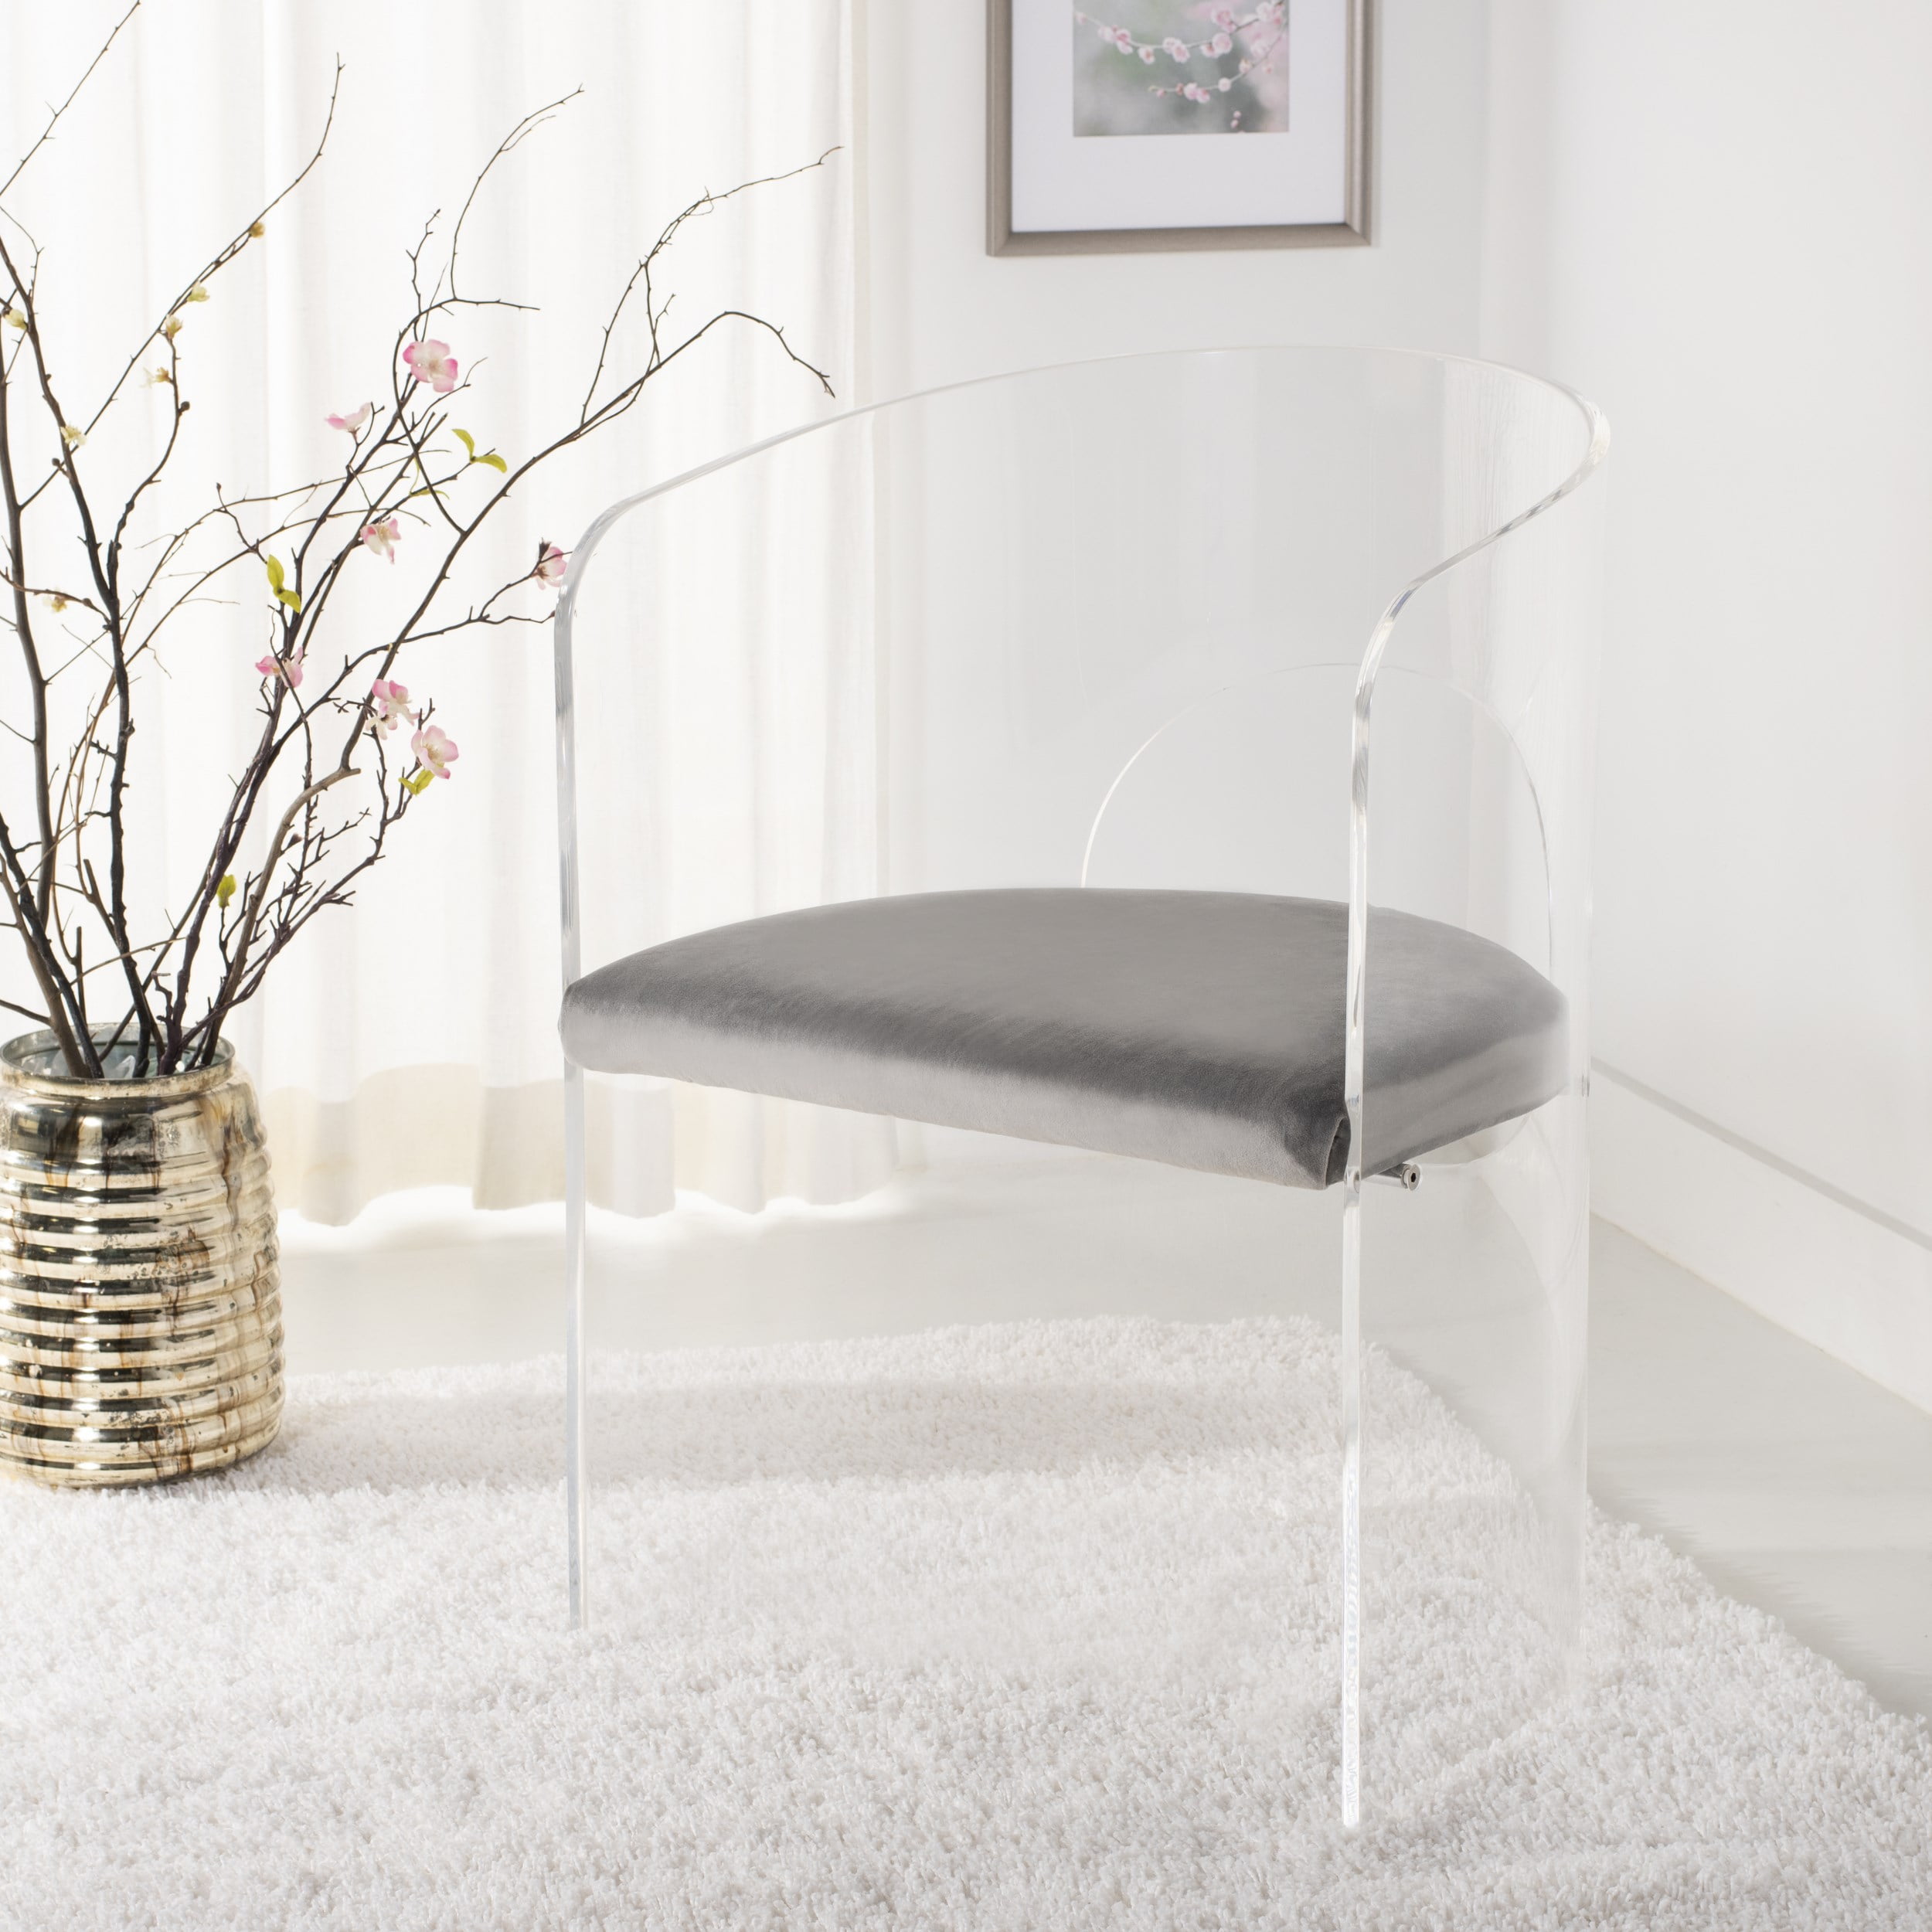 Trendy Acrylic Dining Chairs For A Modern Look